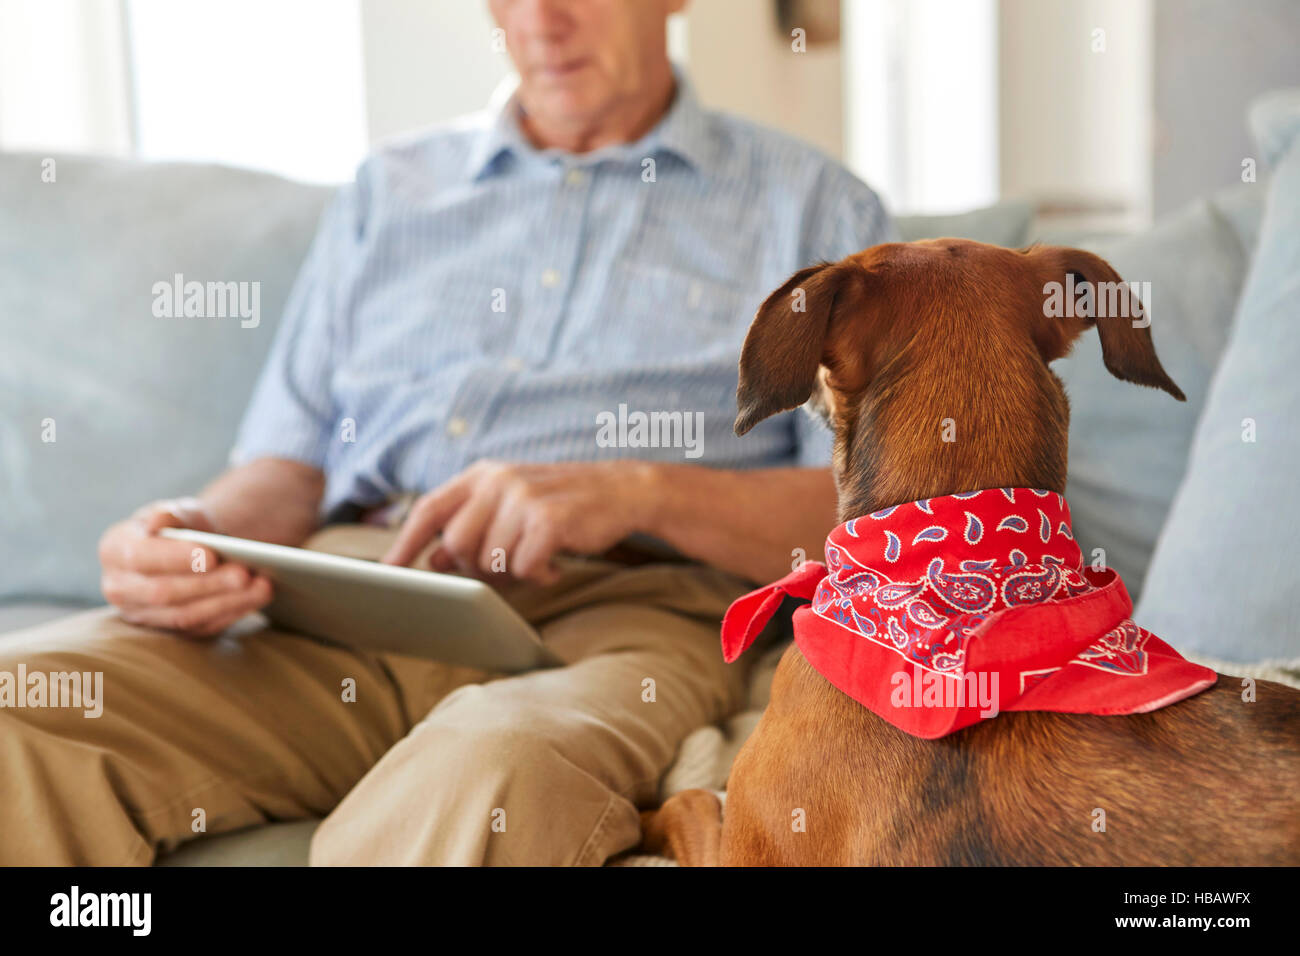 Dog watching owner use digital tablet Stock Photo